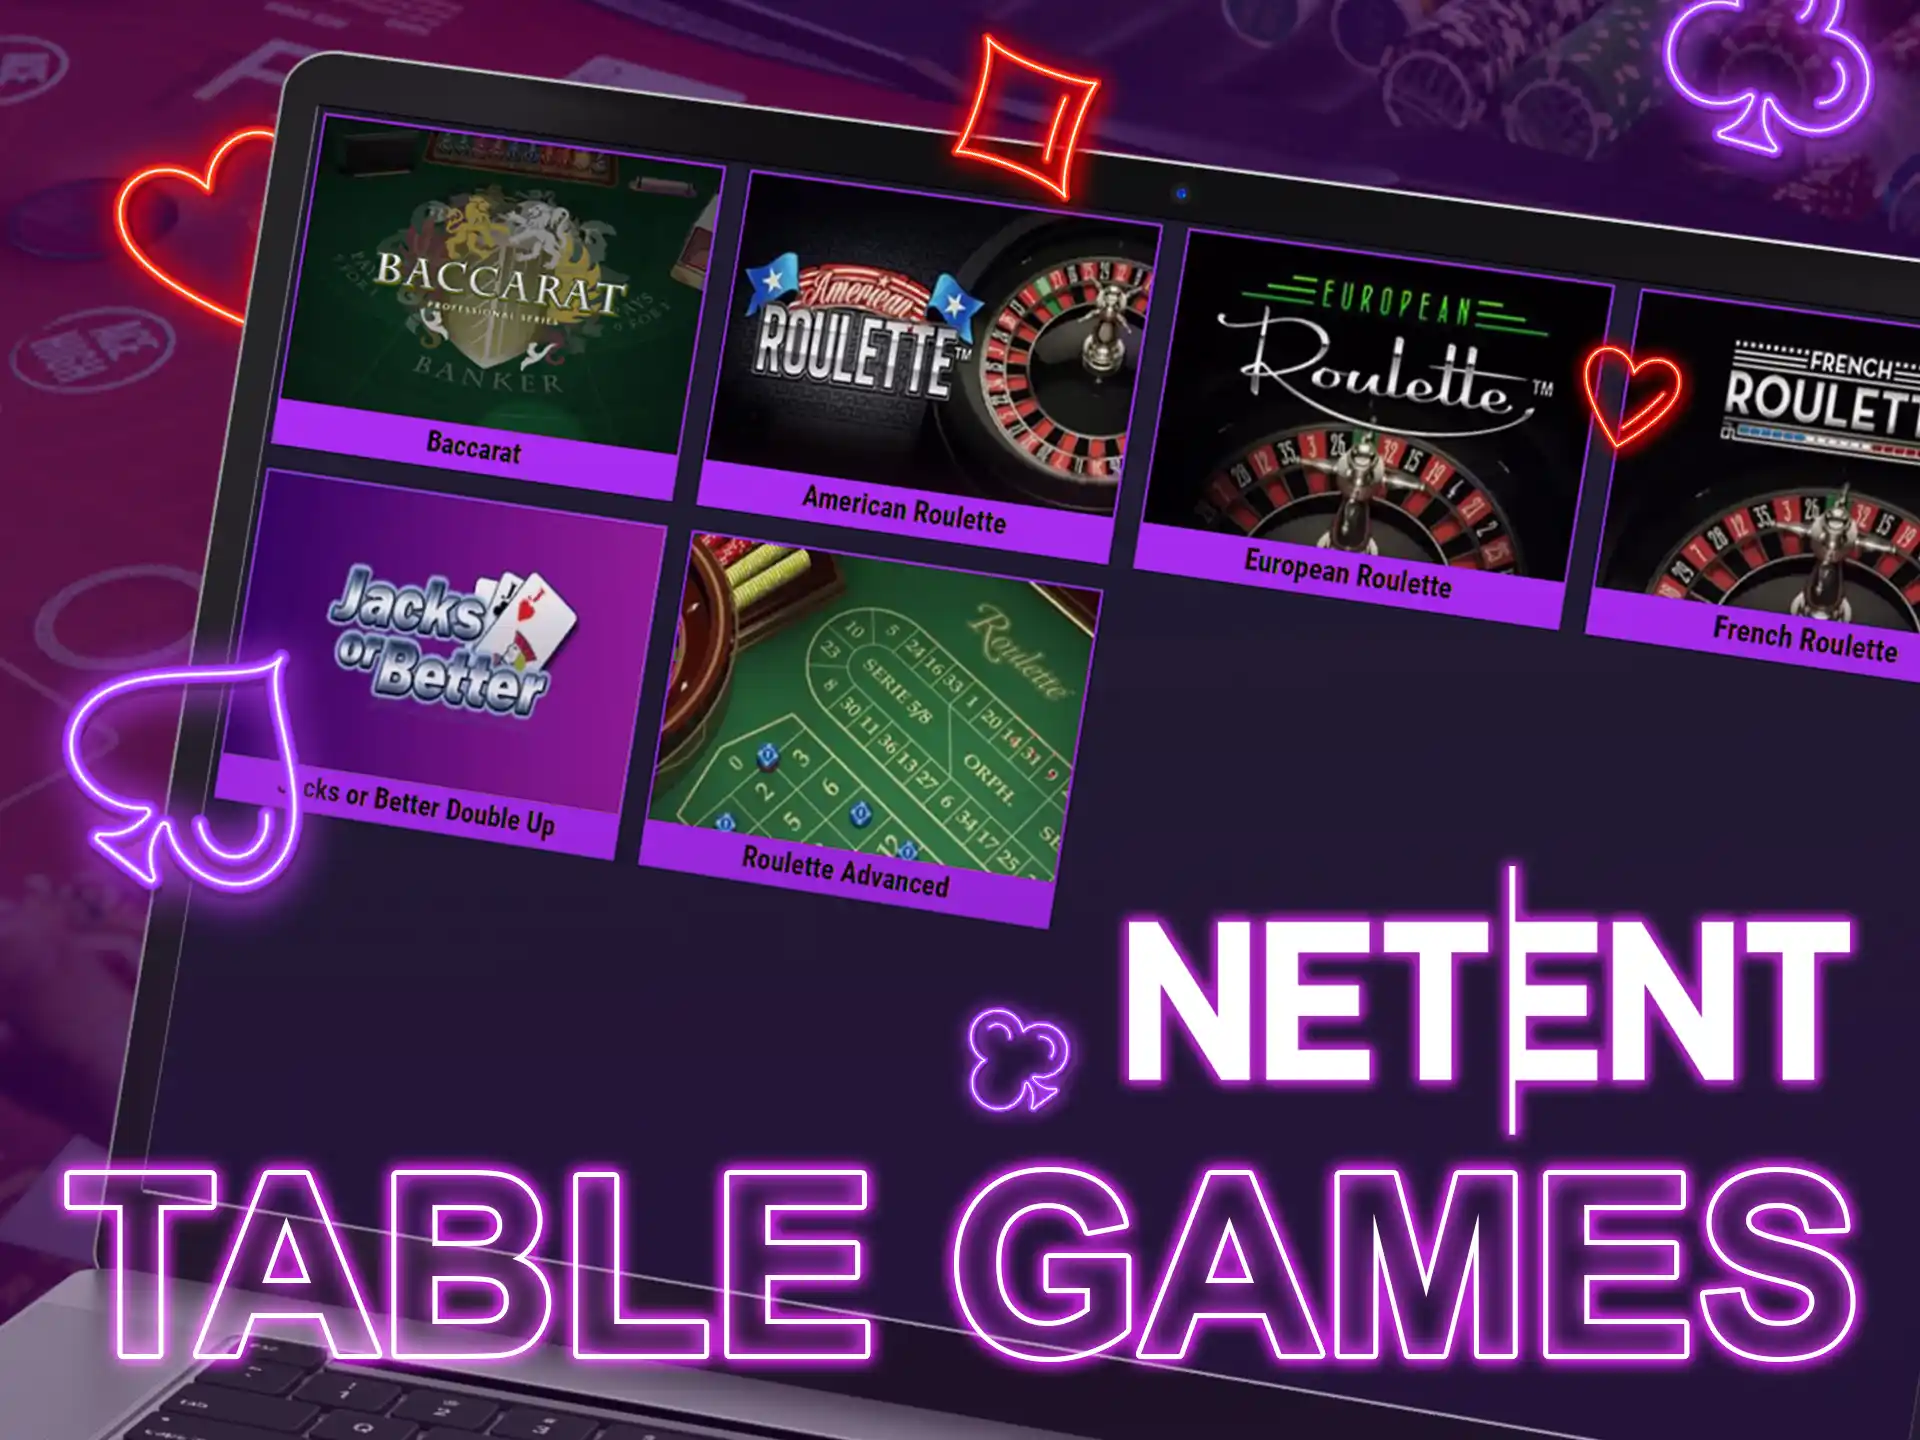 In the table games category, Netent has released blackjack and roulette, and is actively developing this direction.